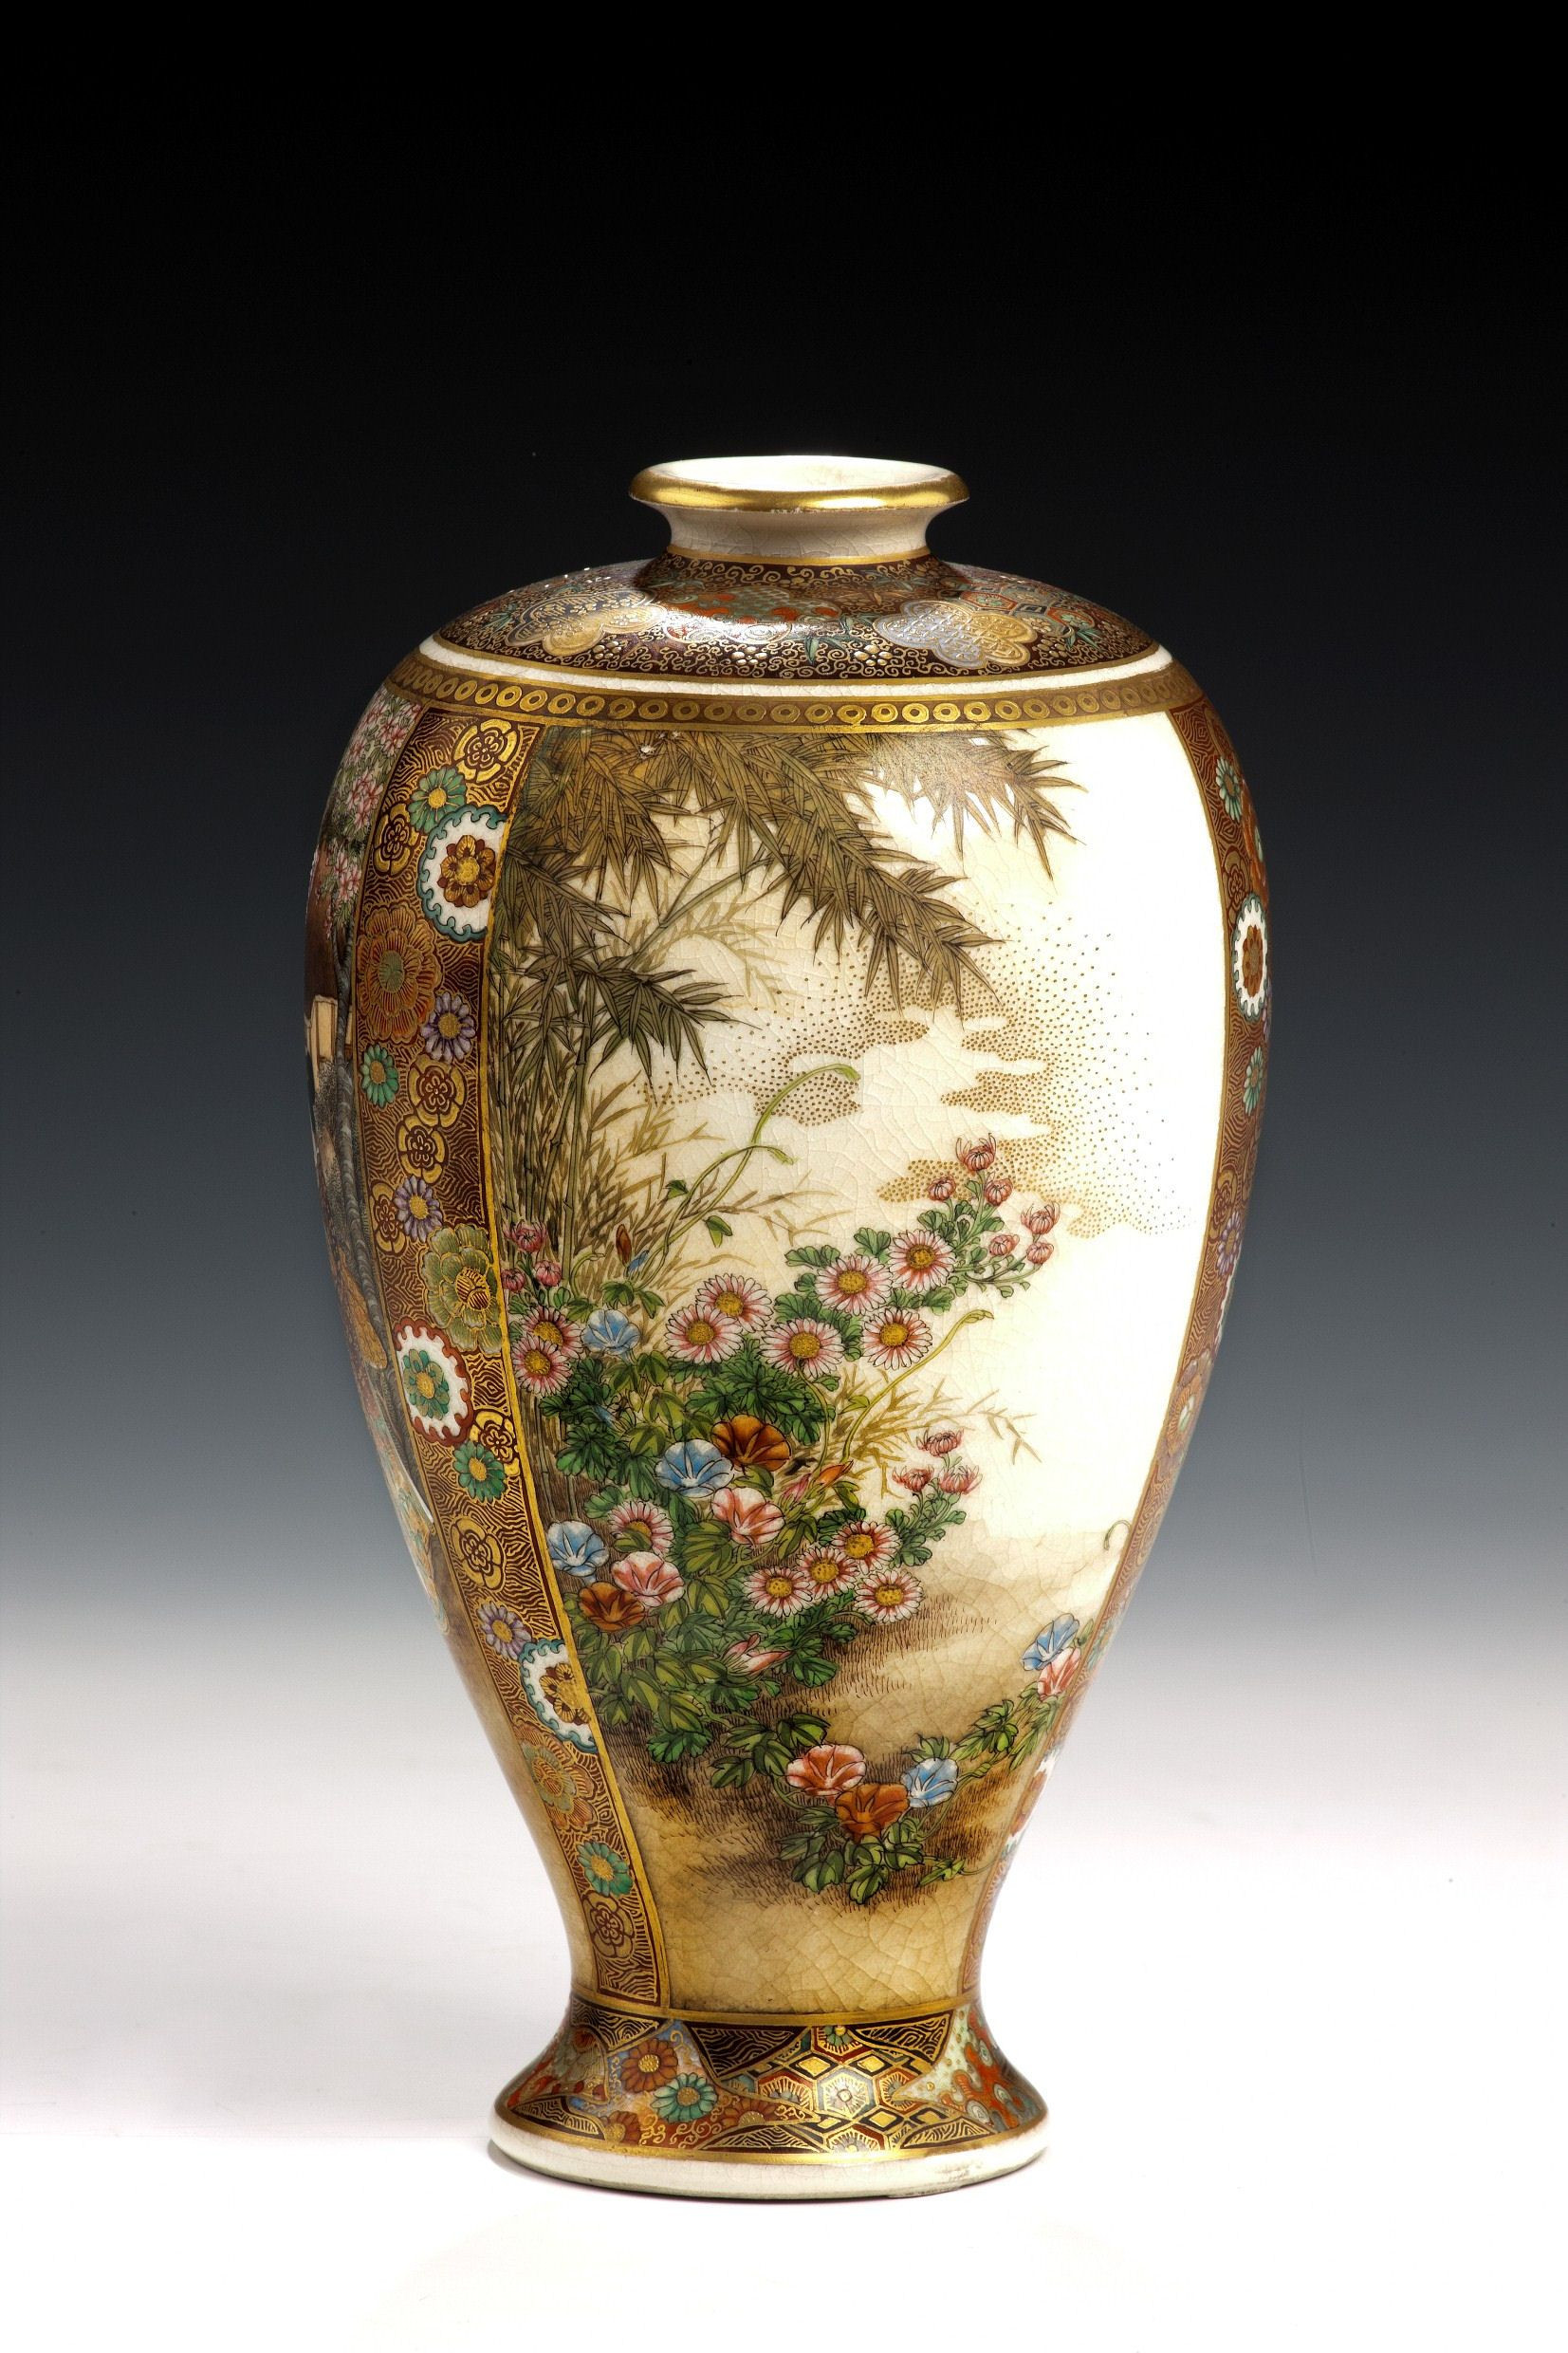 29 Fabulous Satsuma Vase Markings 2024 free download satsuma vase markings of a pair of japanese satsuma vases the vases with panels containing within a pair of japanese satsuma vases the vases with panels containing figures butterflies archai